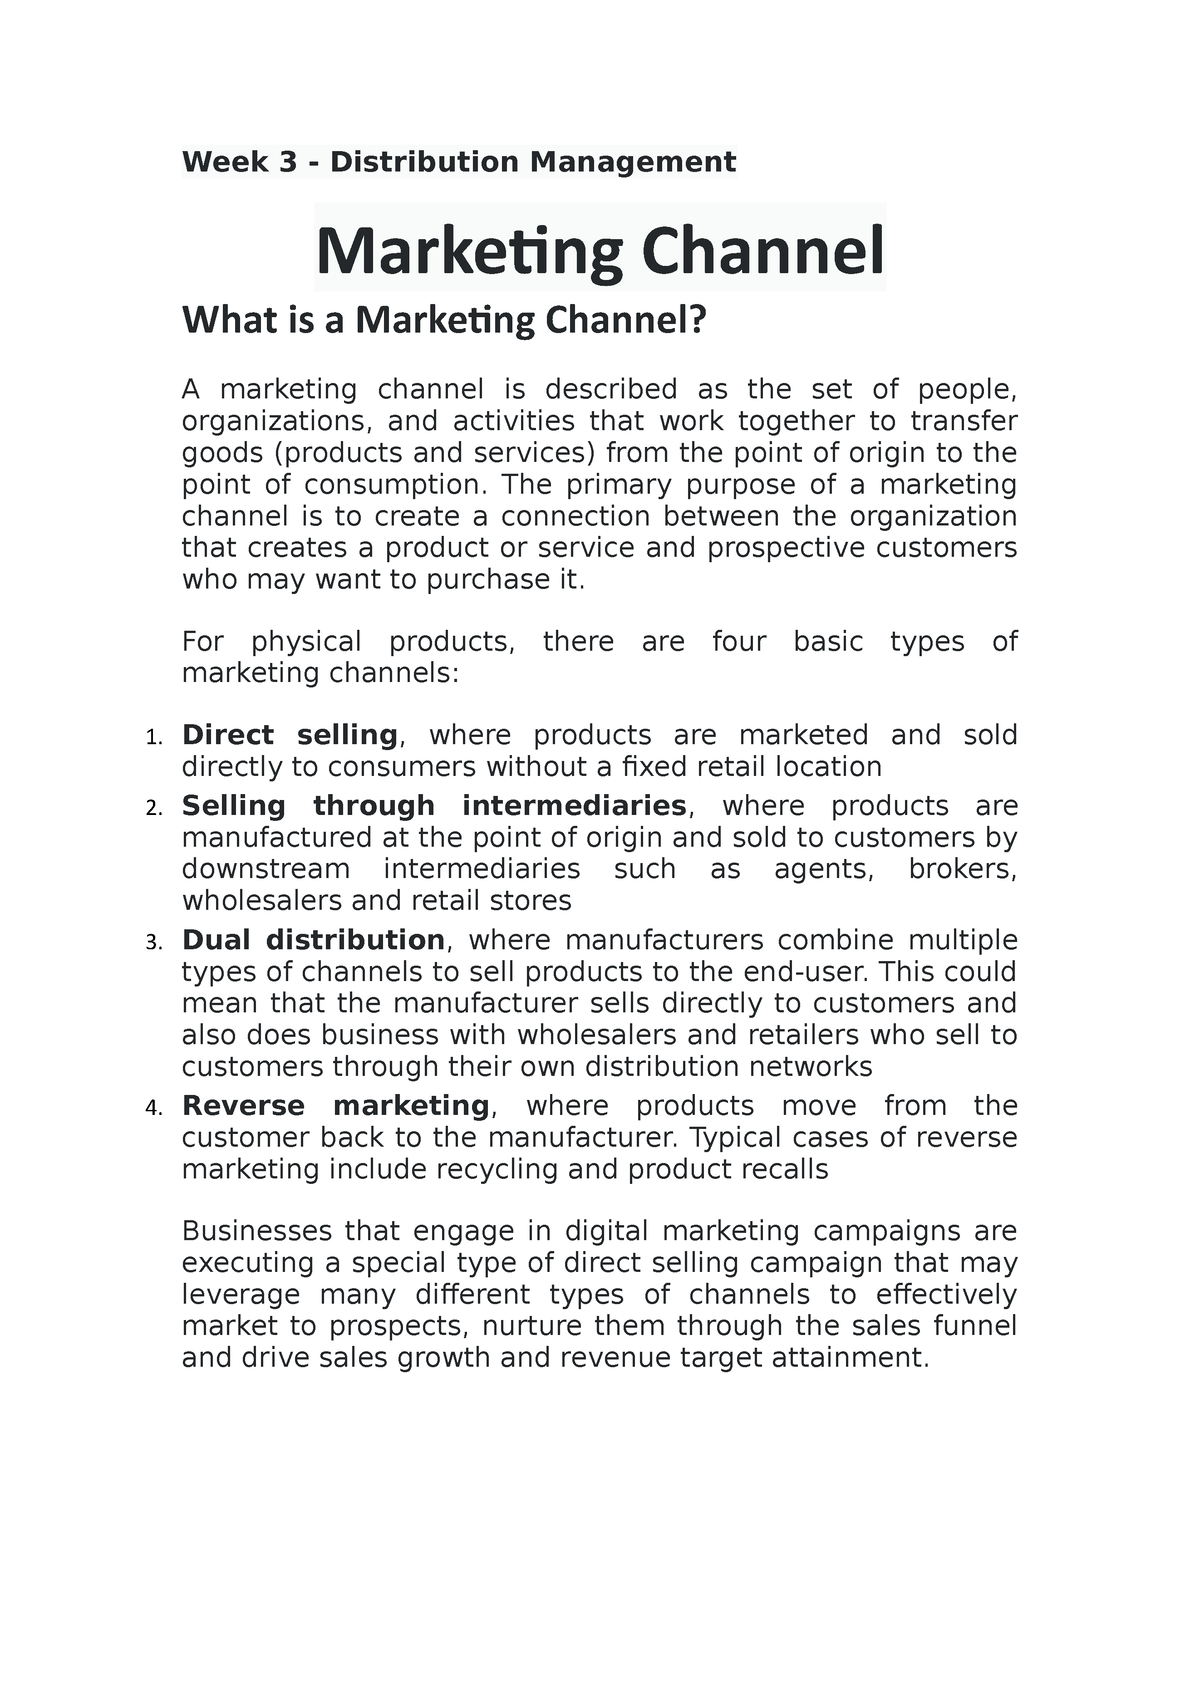 research paper about marketing channel